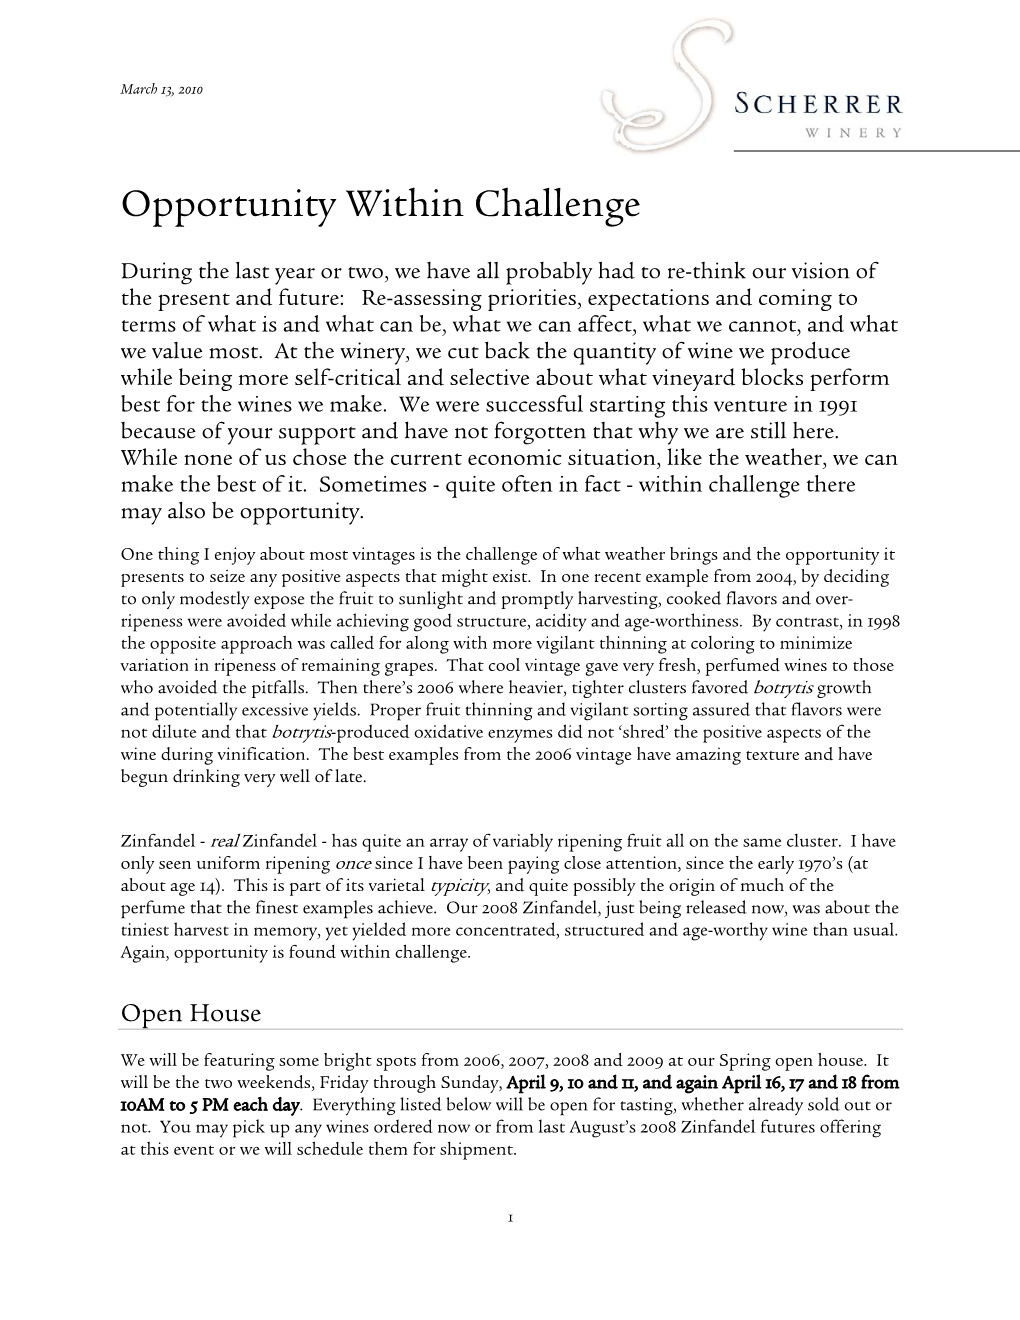 Opportunity Within Challenge